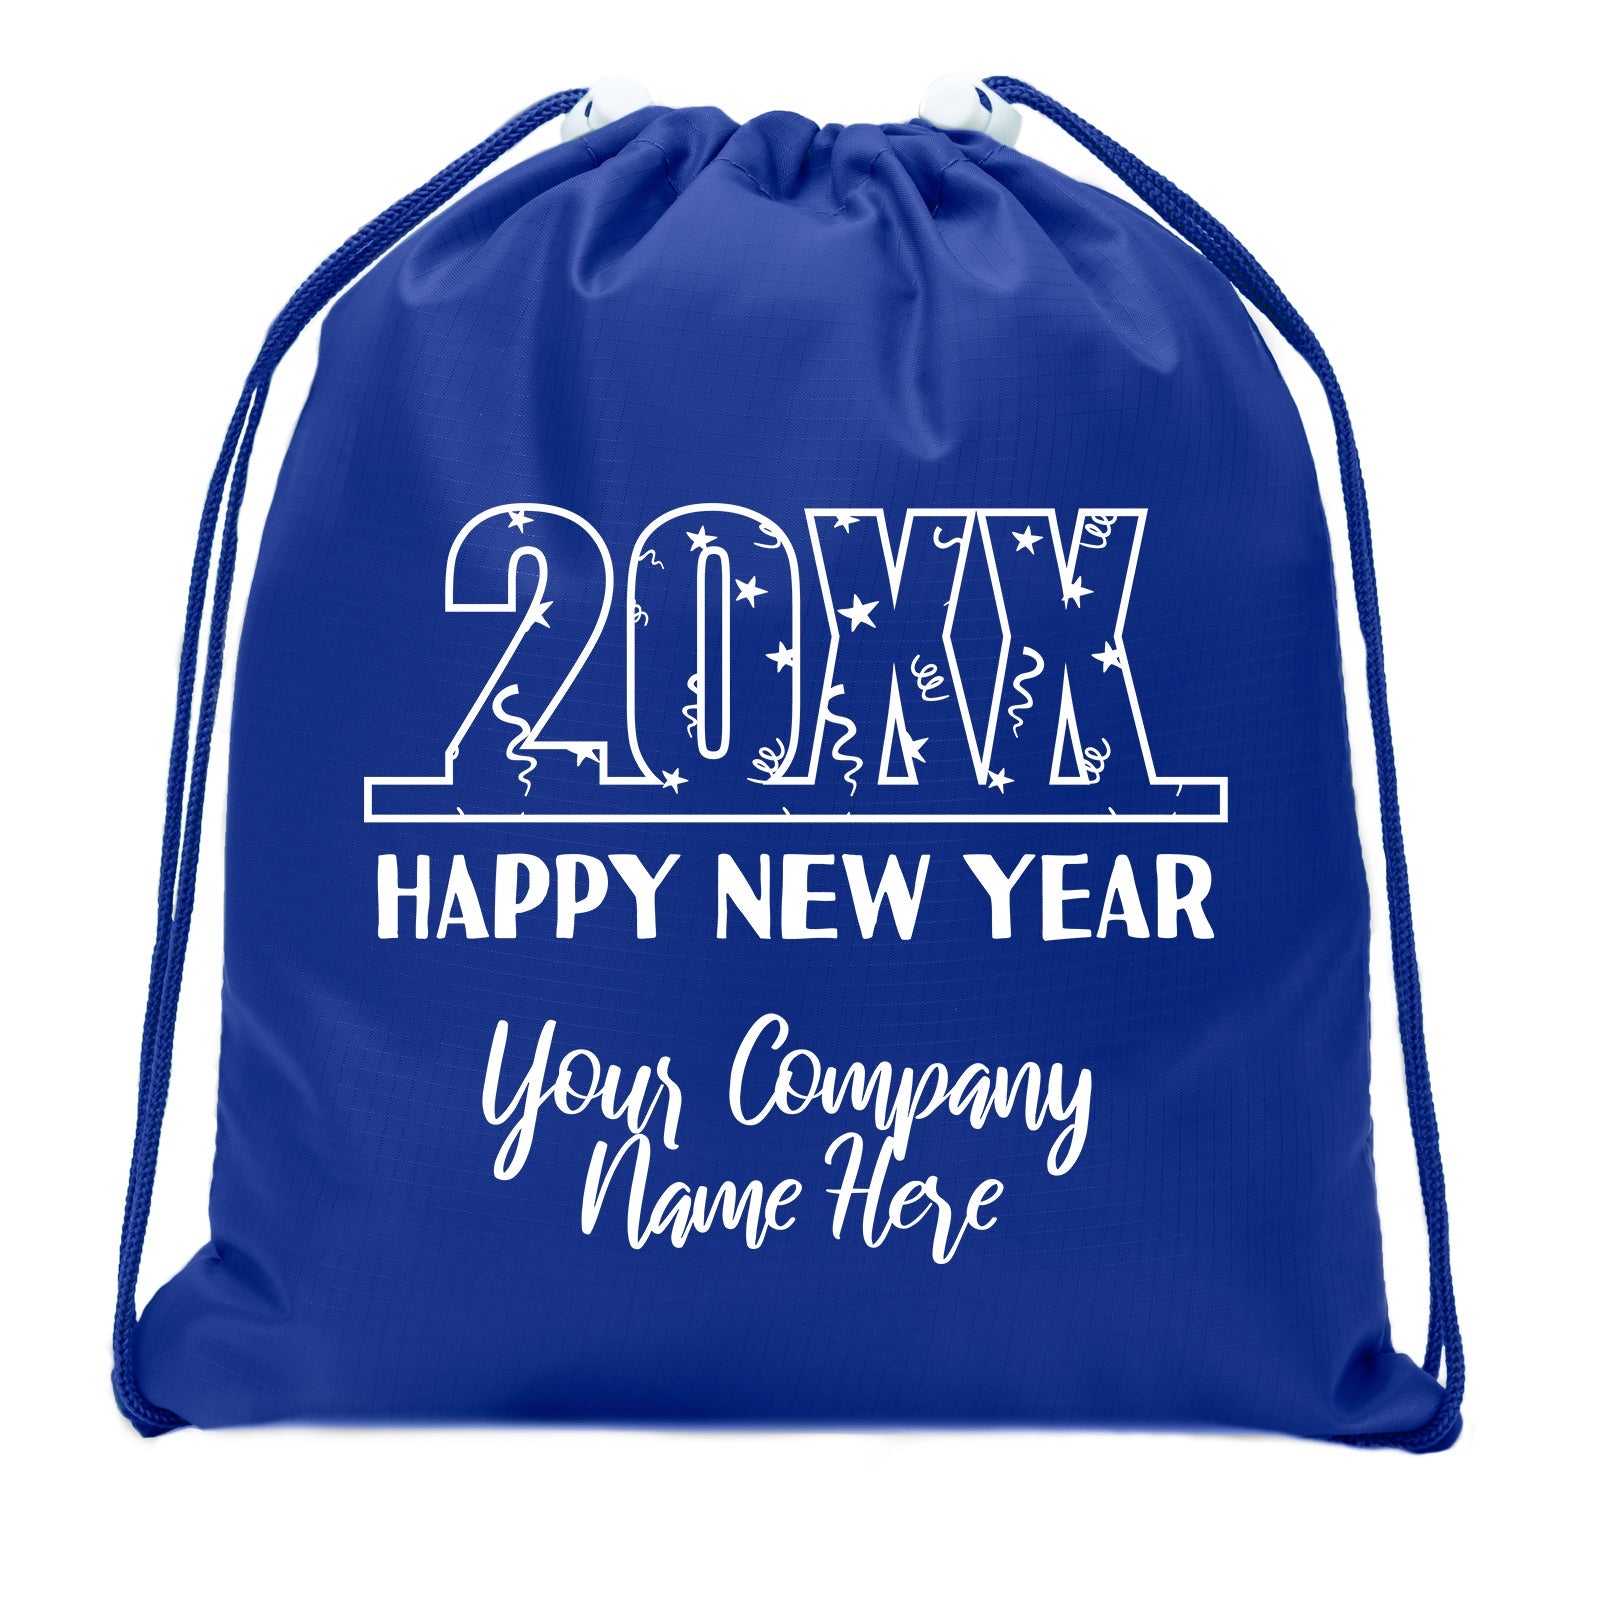 Accessory - New Year’s Eve Party Goody Bags, Table Top New Years Decorations, 2019 Gift Bags - Custom Company Name